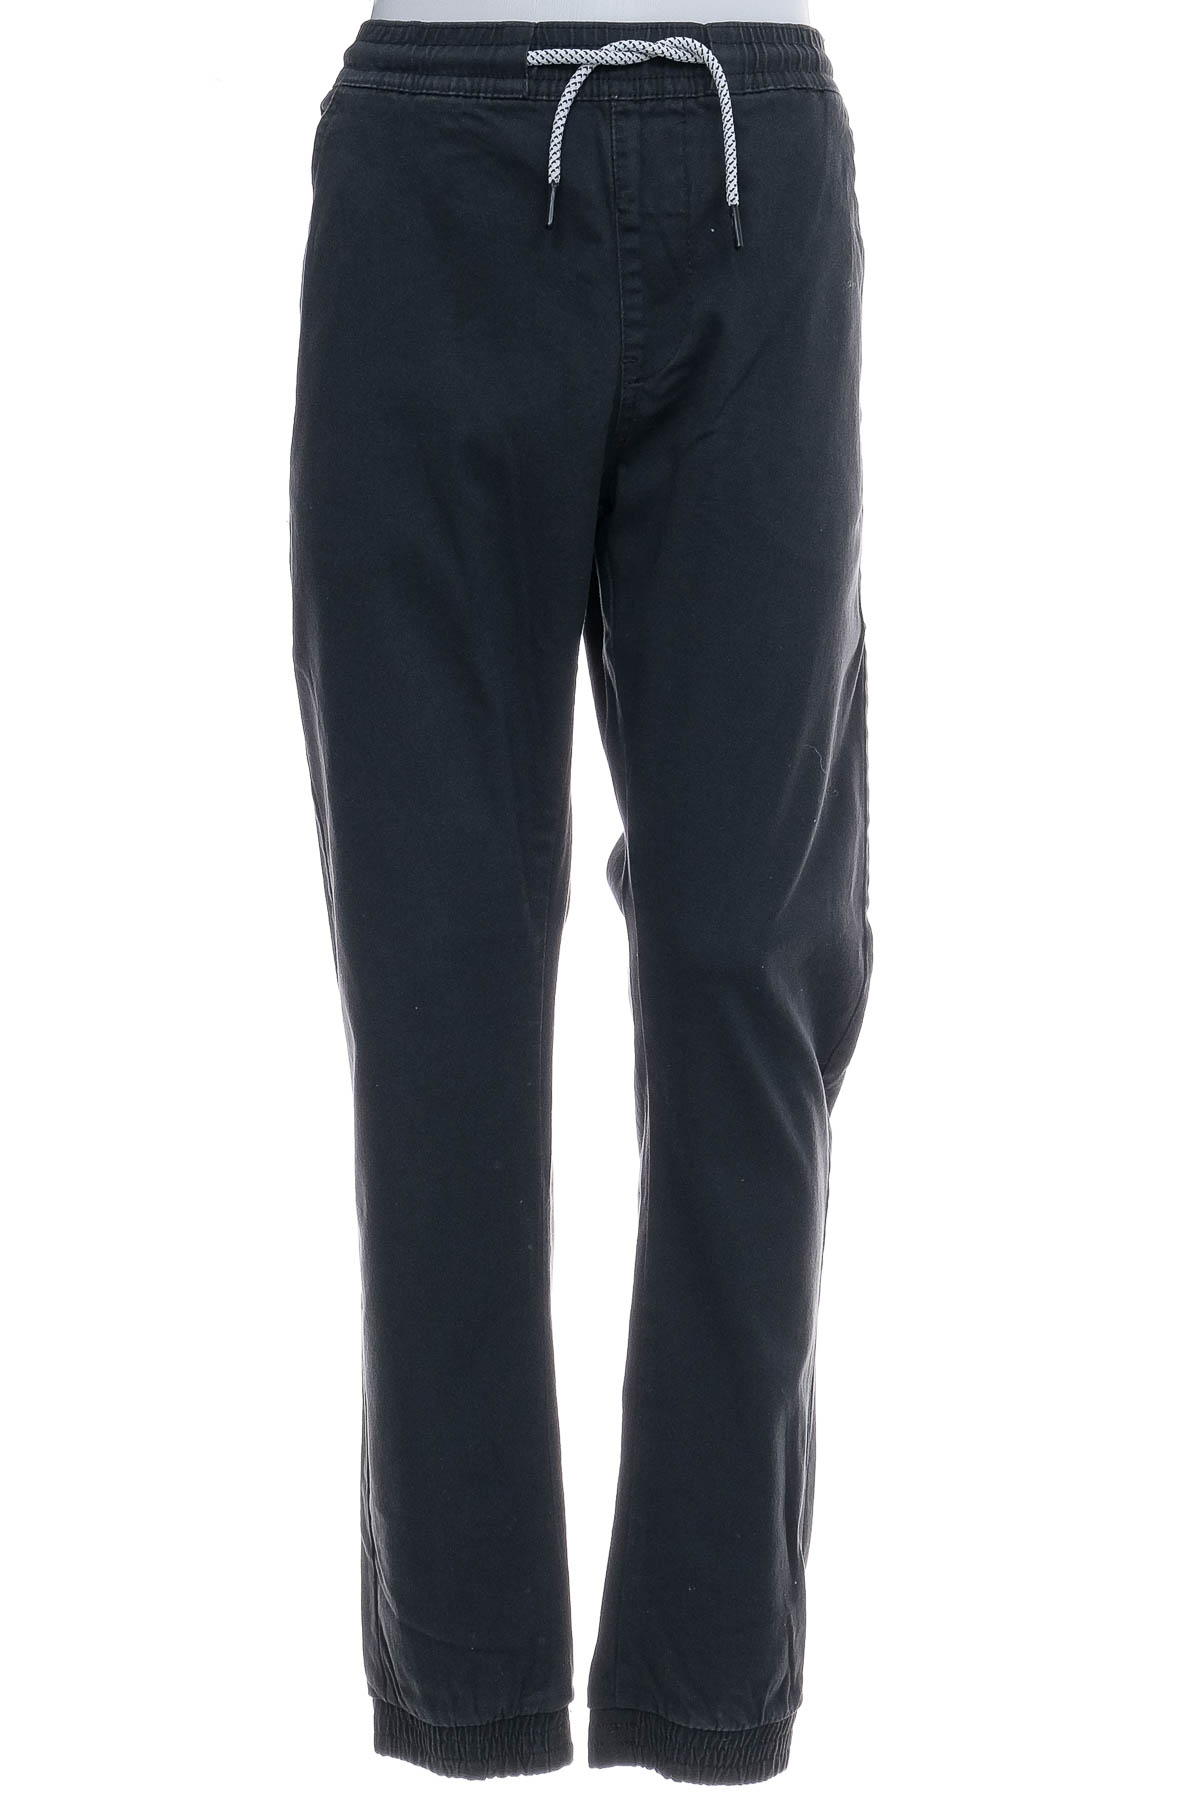 Men's trousers - HOUSE BRAND - 0